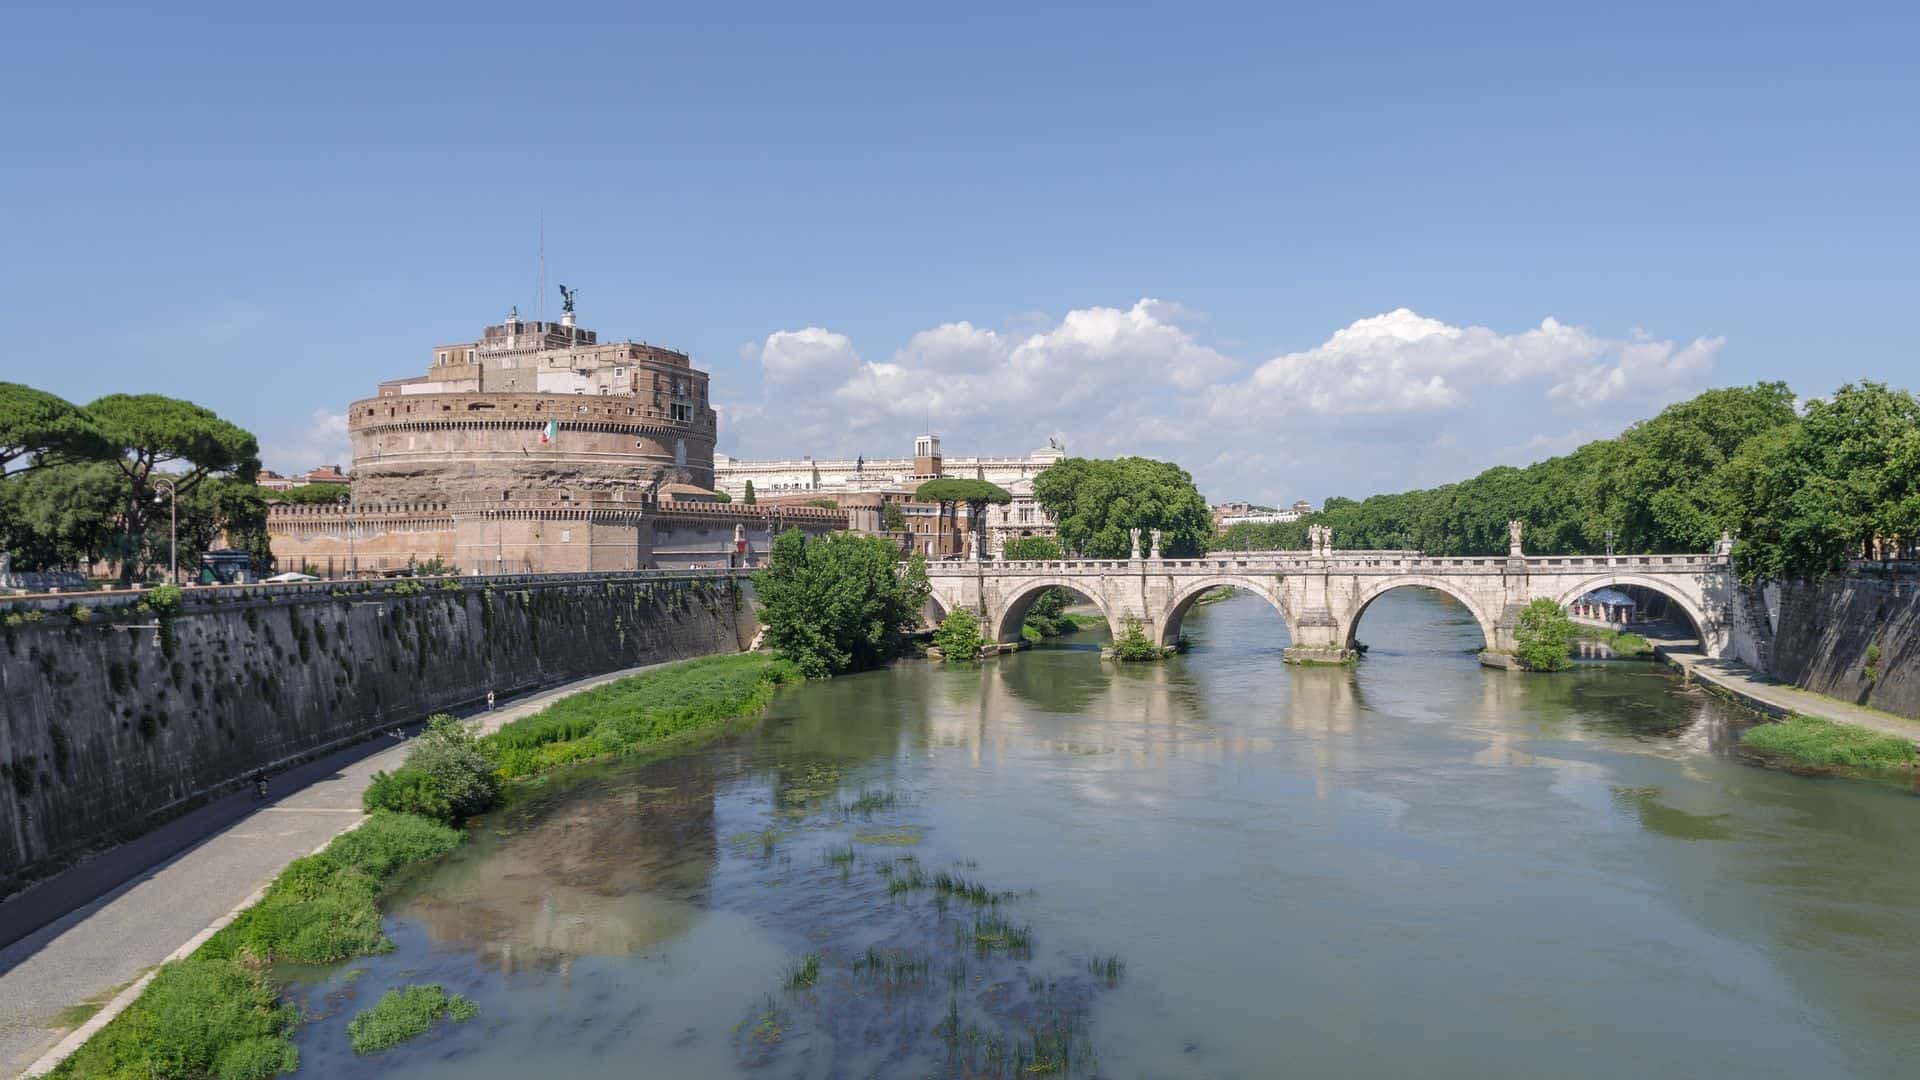 A view of the Tiber River and Castel Sant'Angelo